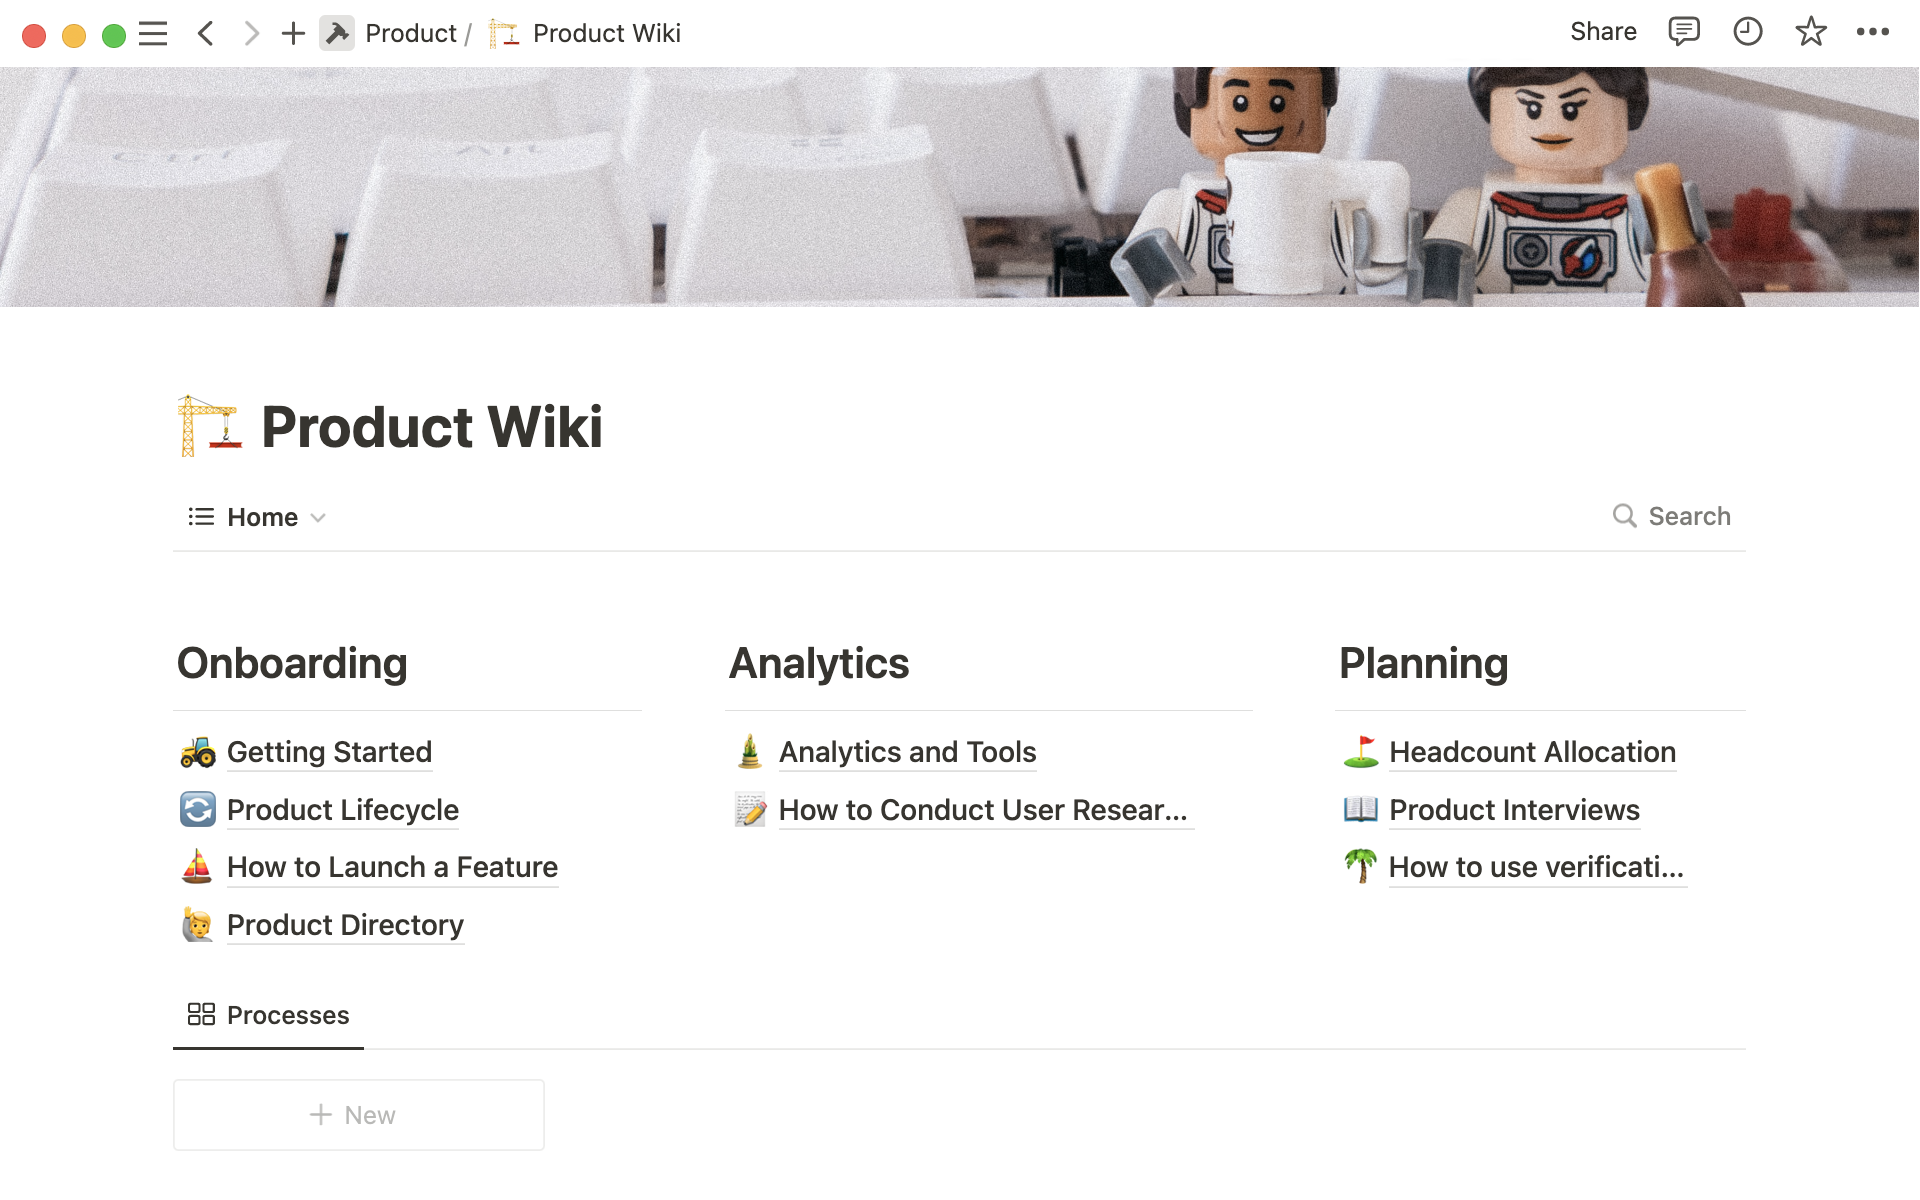 Your product wiki can be the hub for all your team’s work.